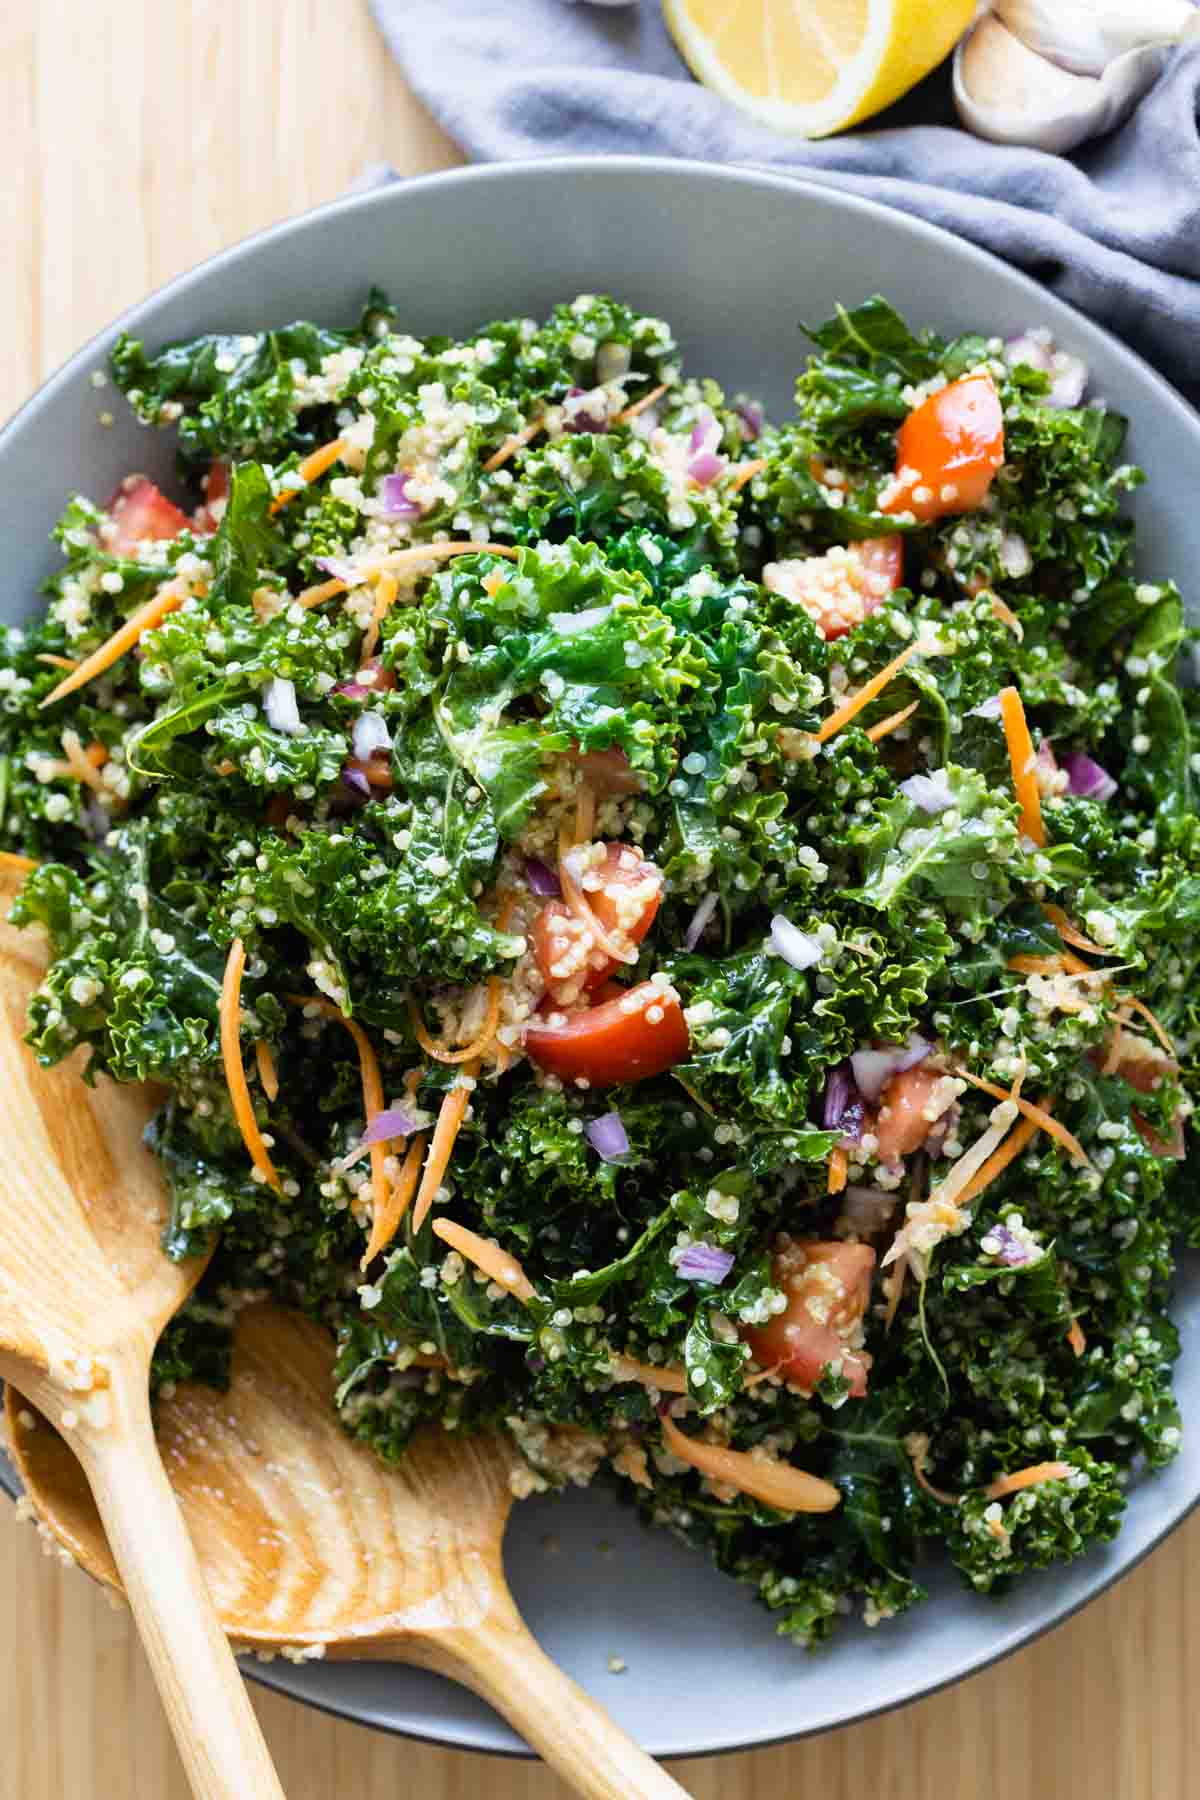 Kale Quinoa Salad in a grey salad bowl with wooden spoons.